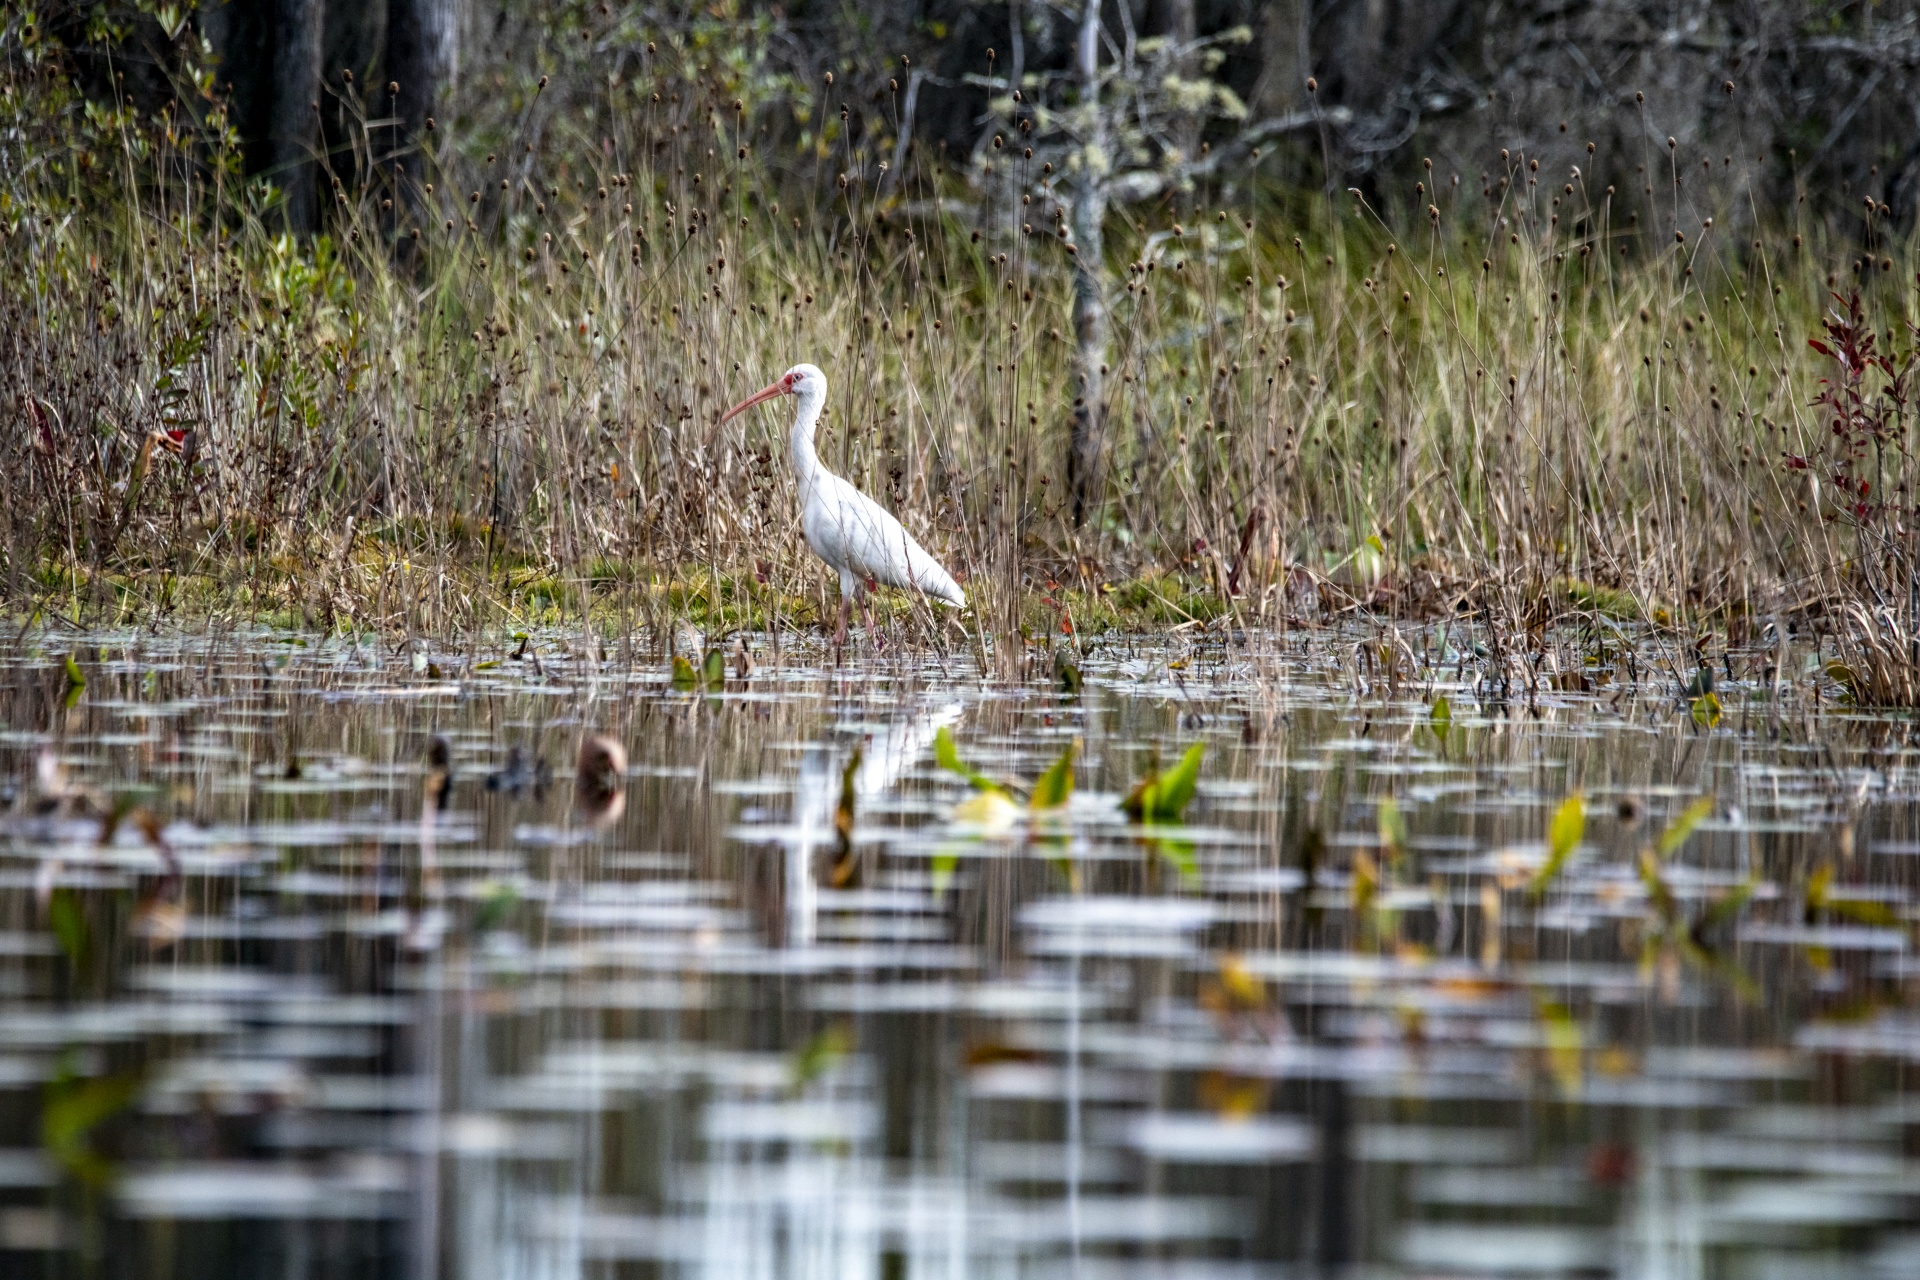 Egret in the shallow waters of the okefenokee swamp in Georgia